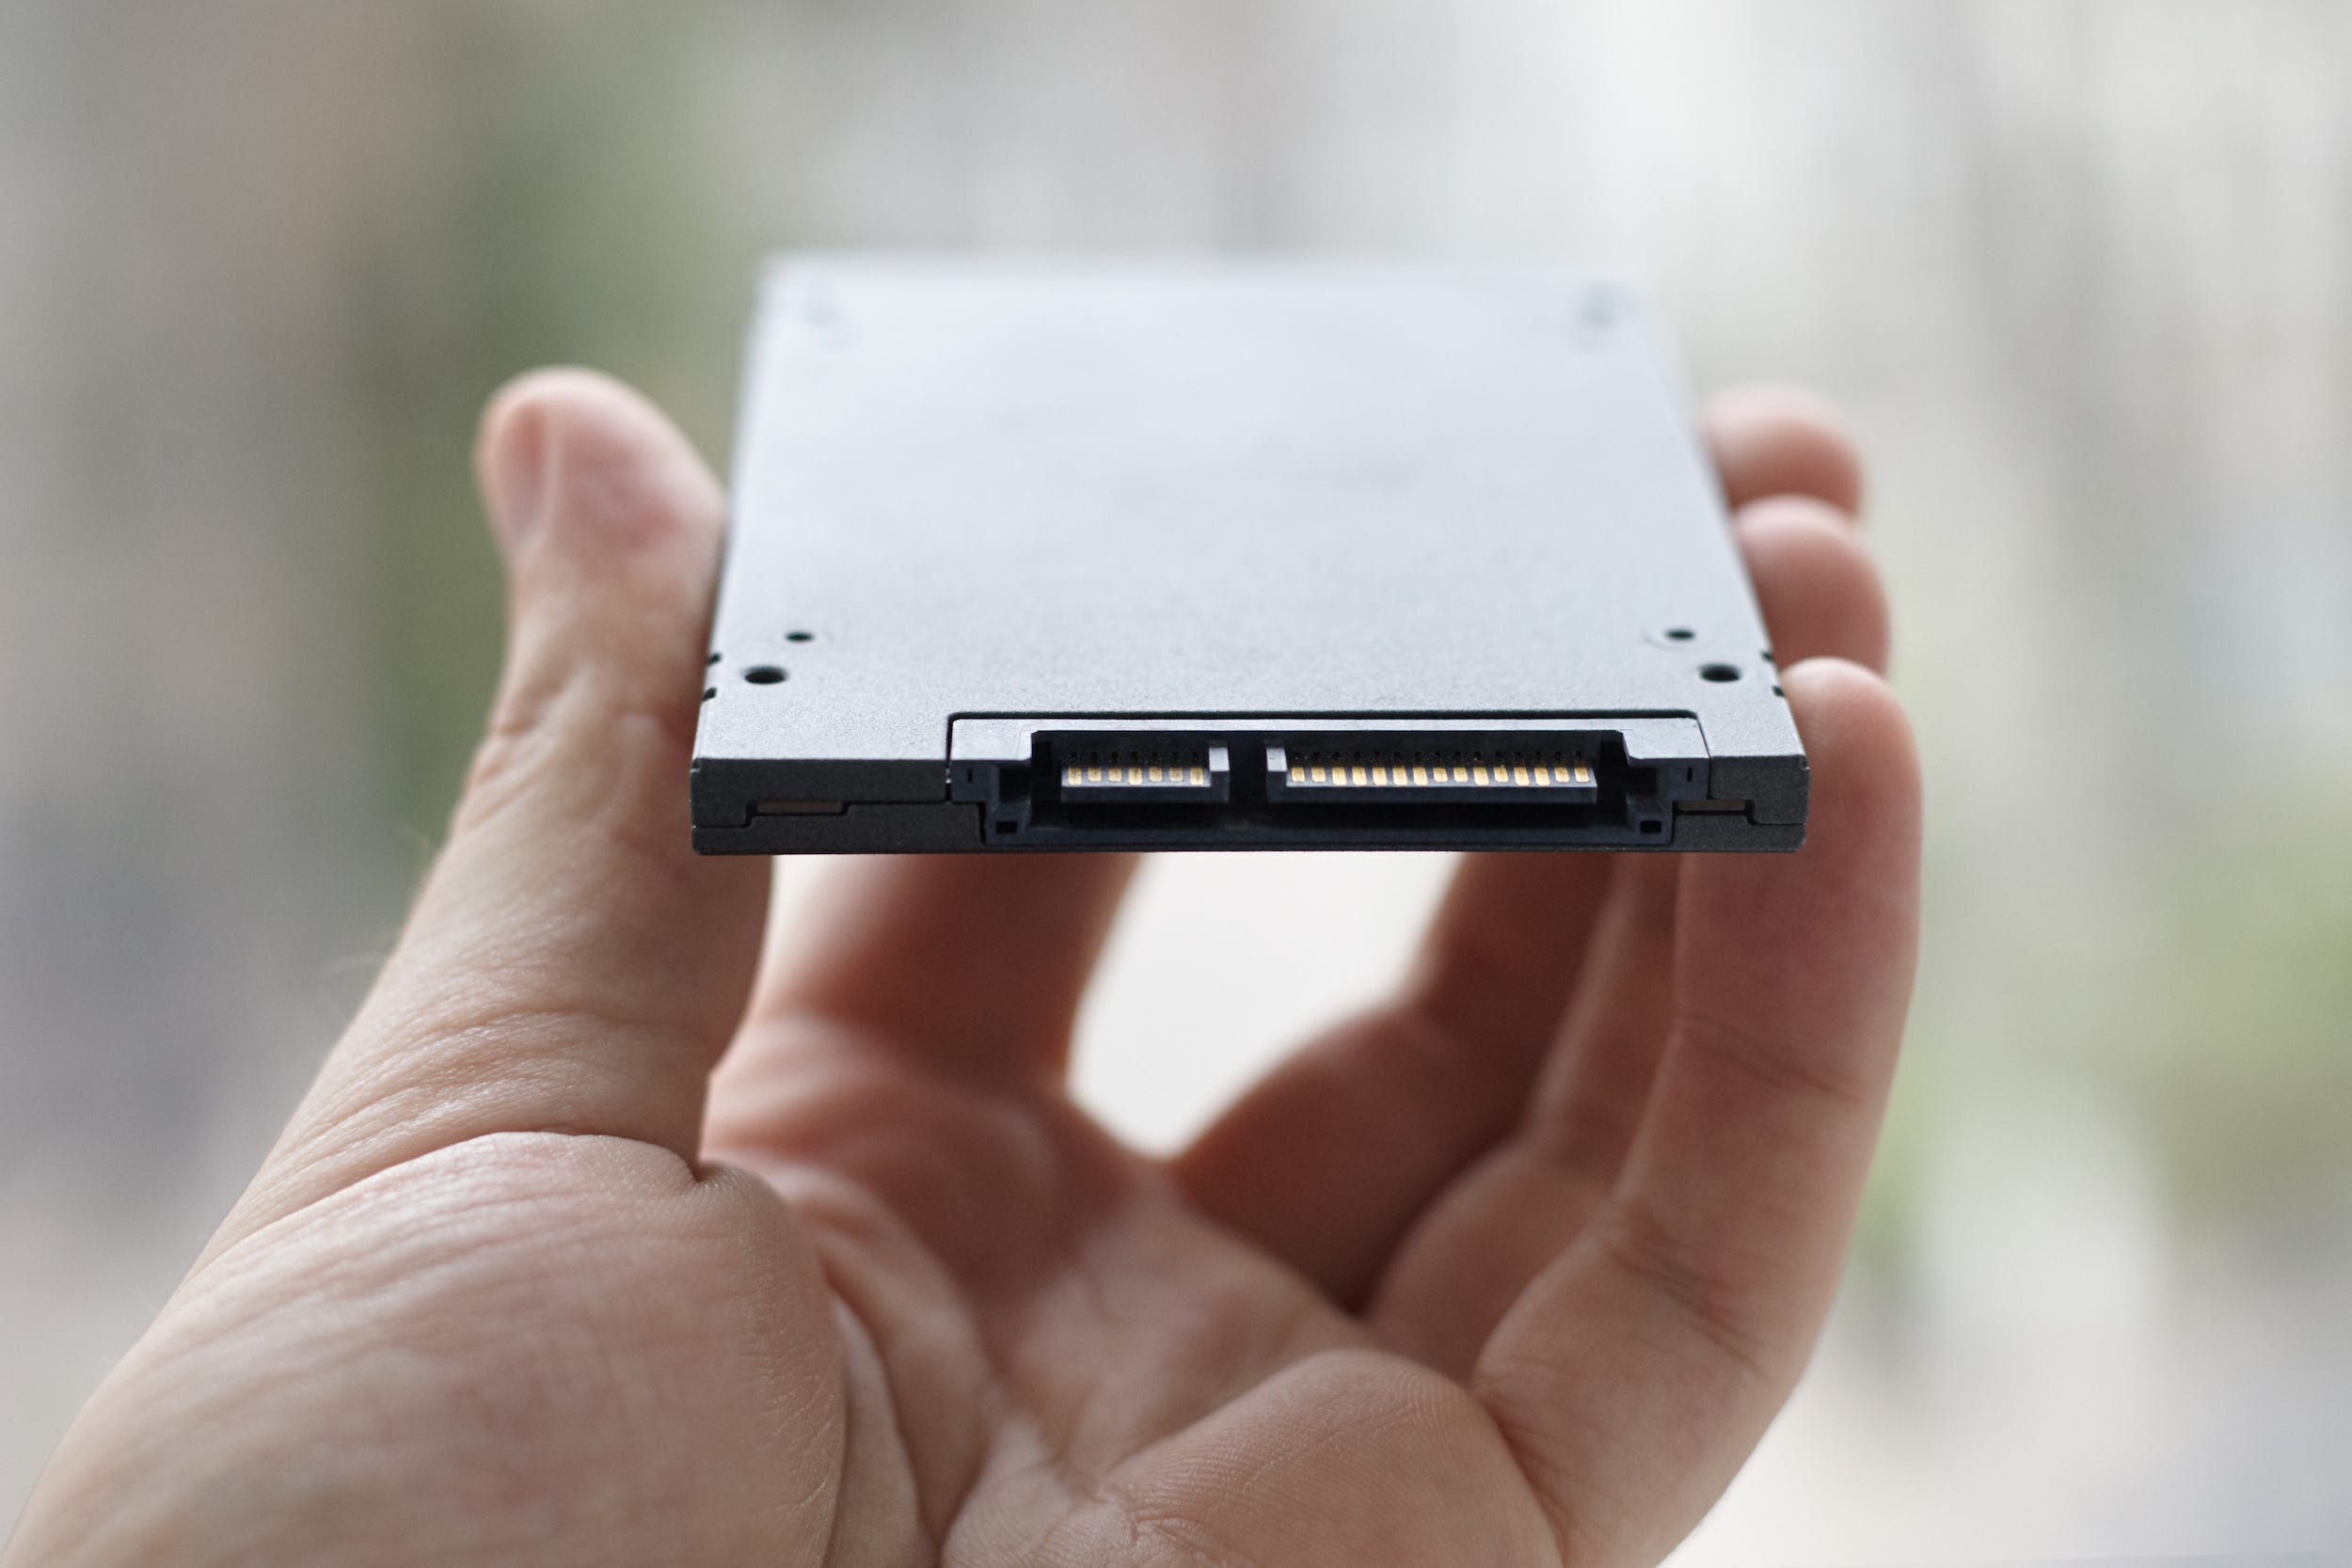 solid state drive SSD